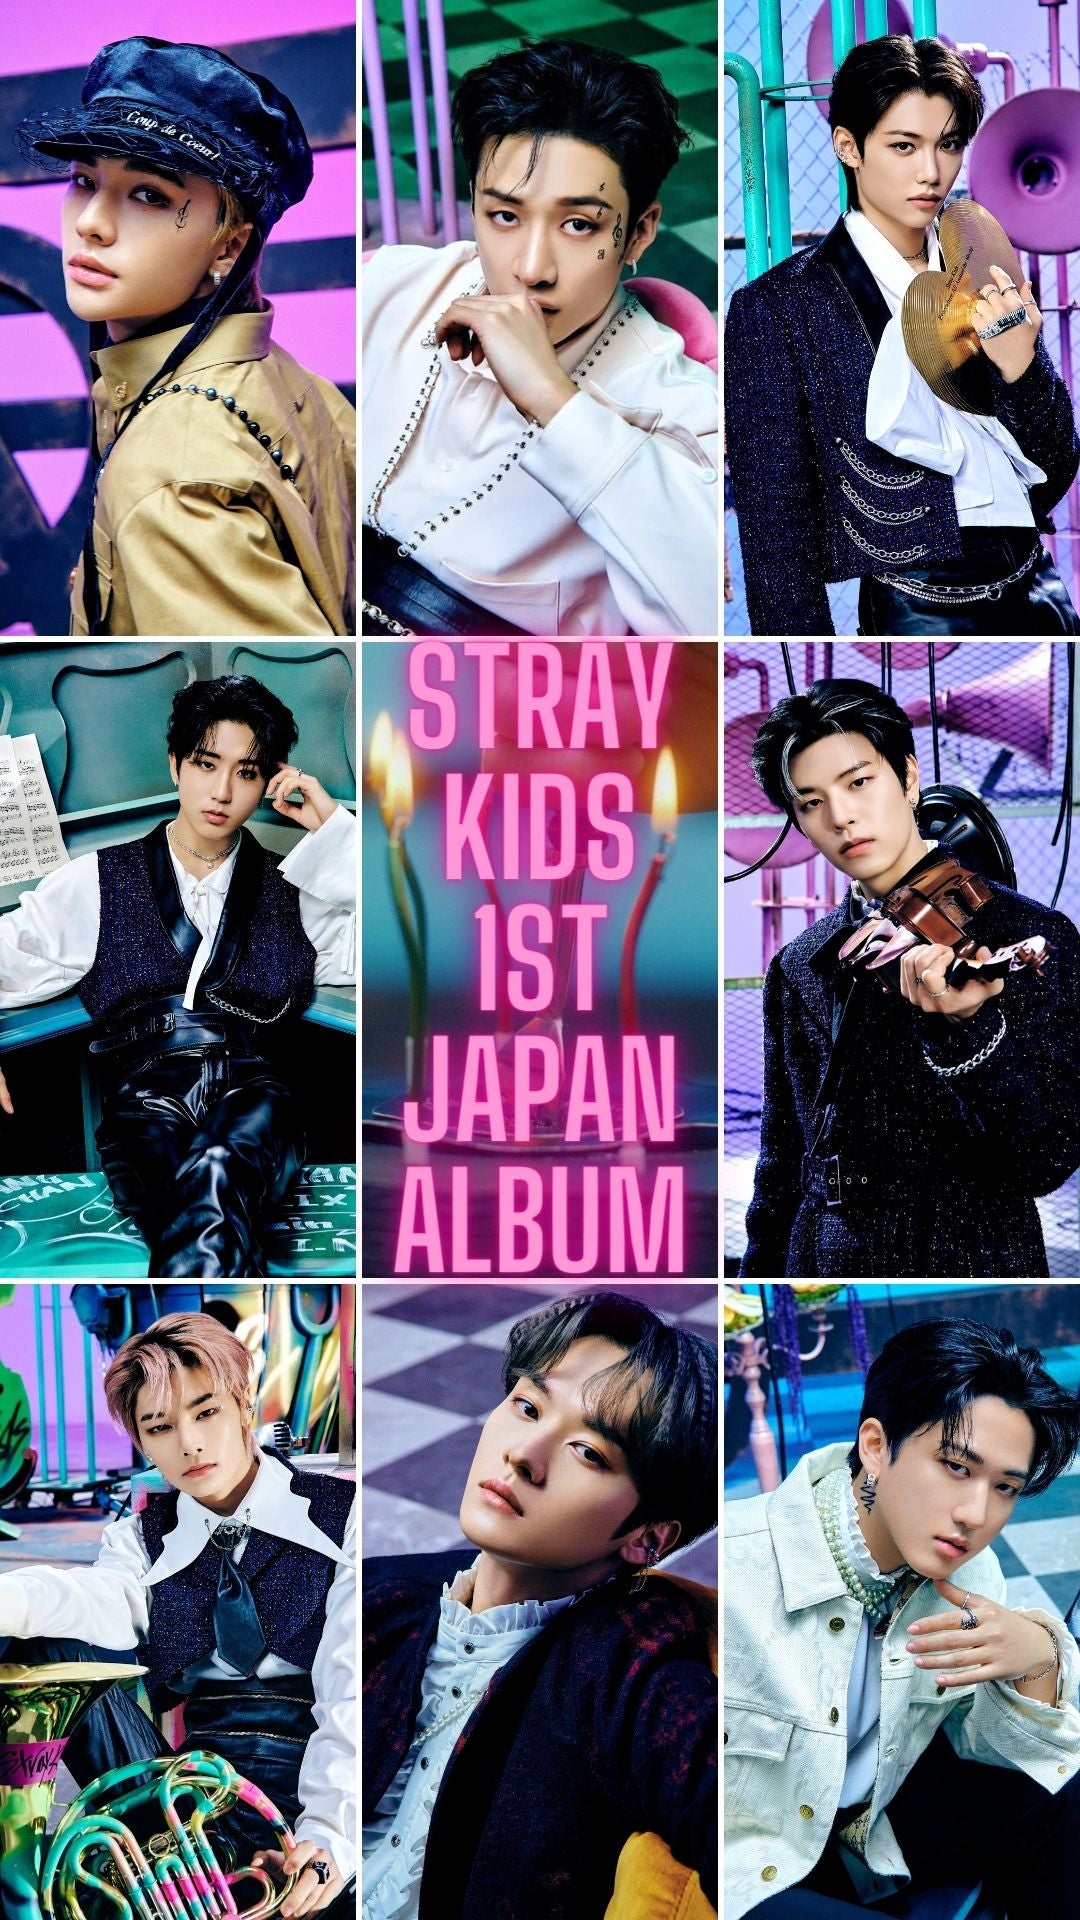 Stray Kids - Purchase albums, books, and merchandise here